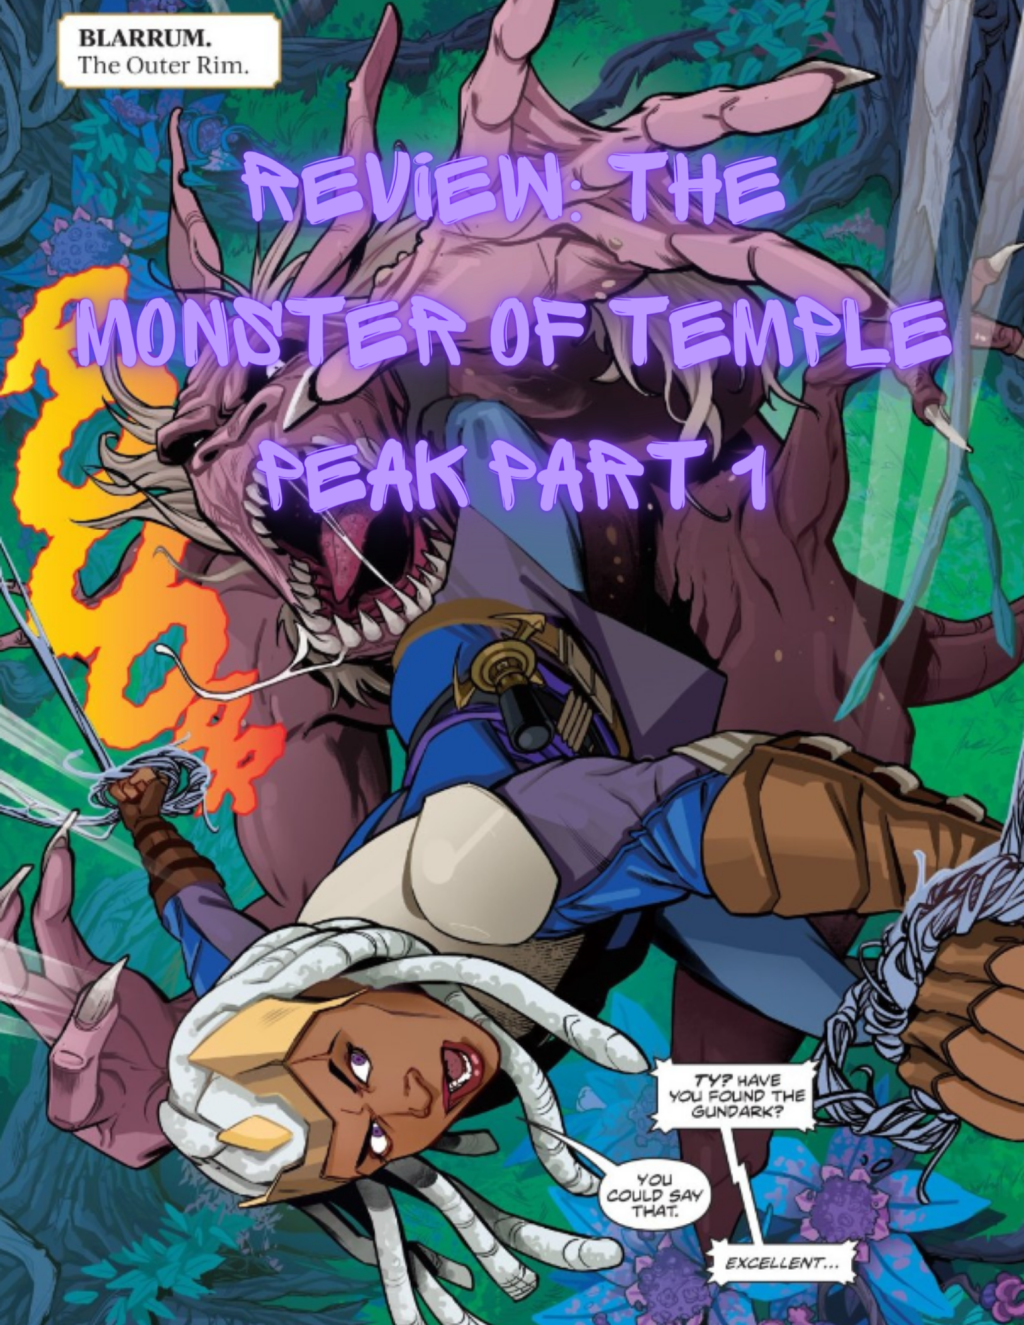 Review: The Monster of Temple Peak Part 1